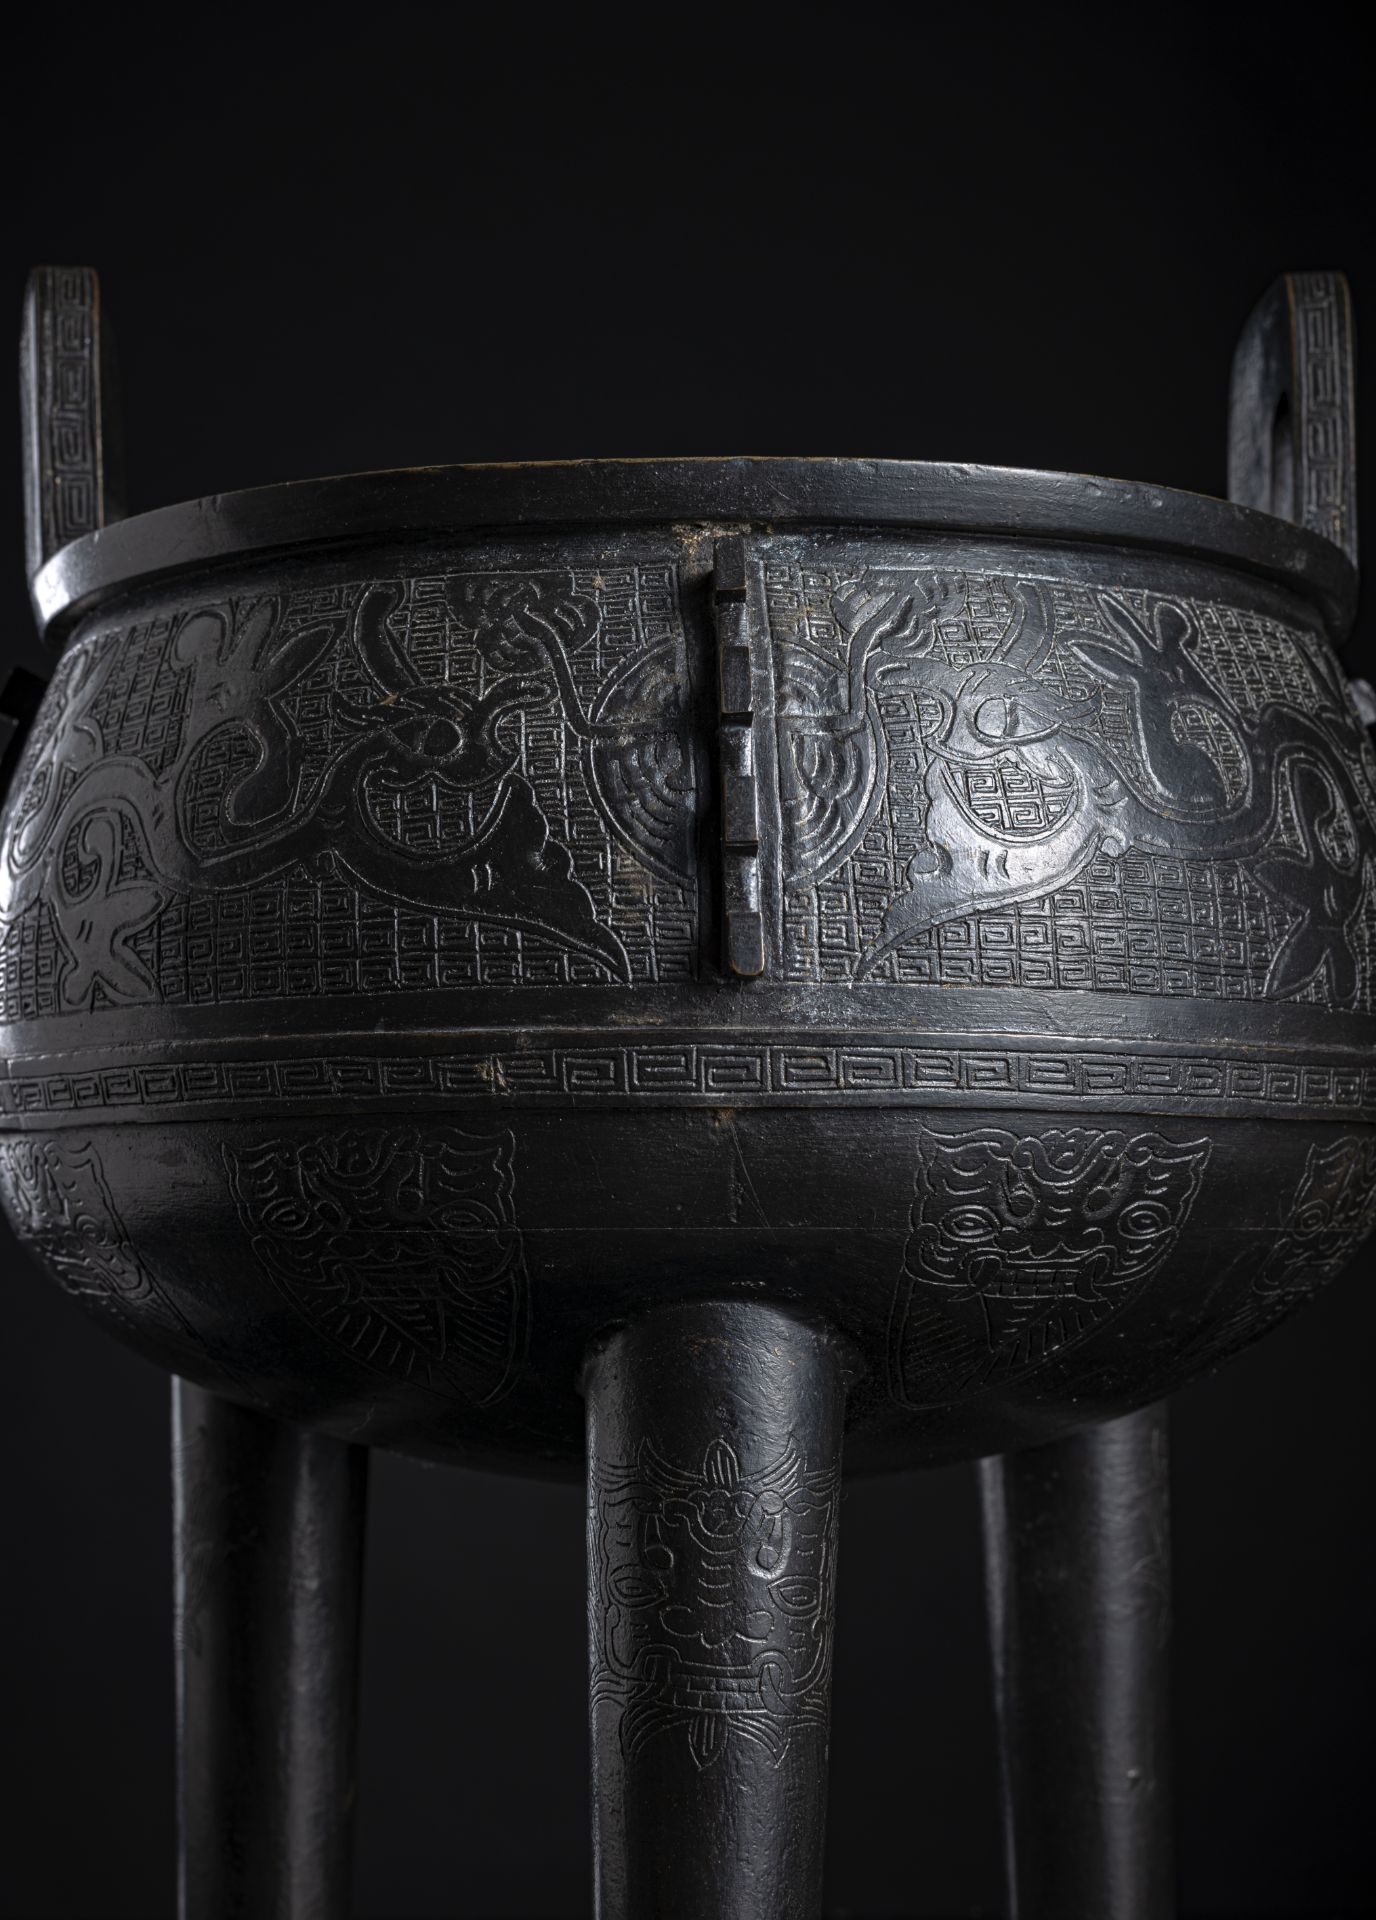 A LARGE TRIPOD CENSER DING WITH WOOD COVER AND STONE HANDLE - Image 4 of 4